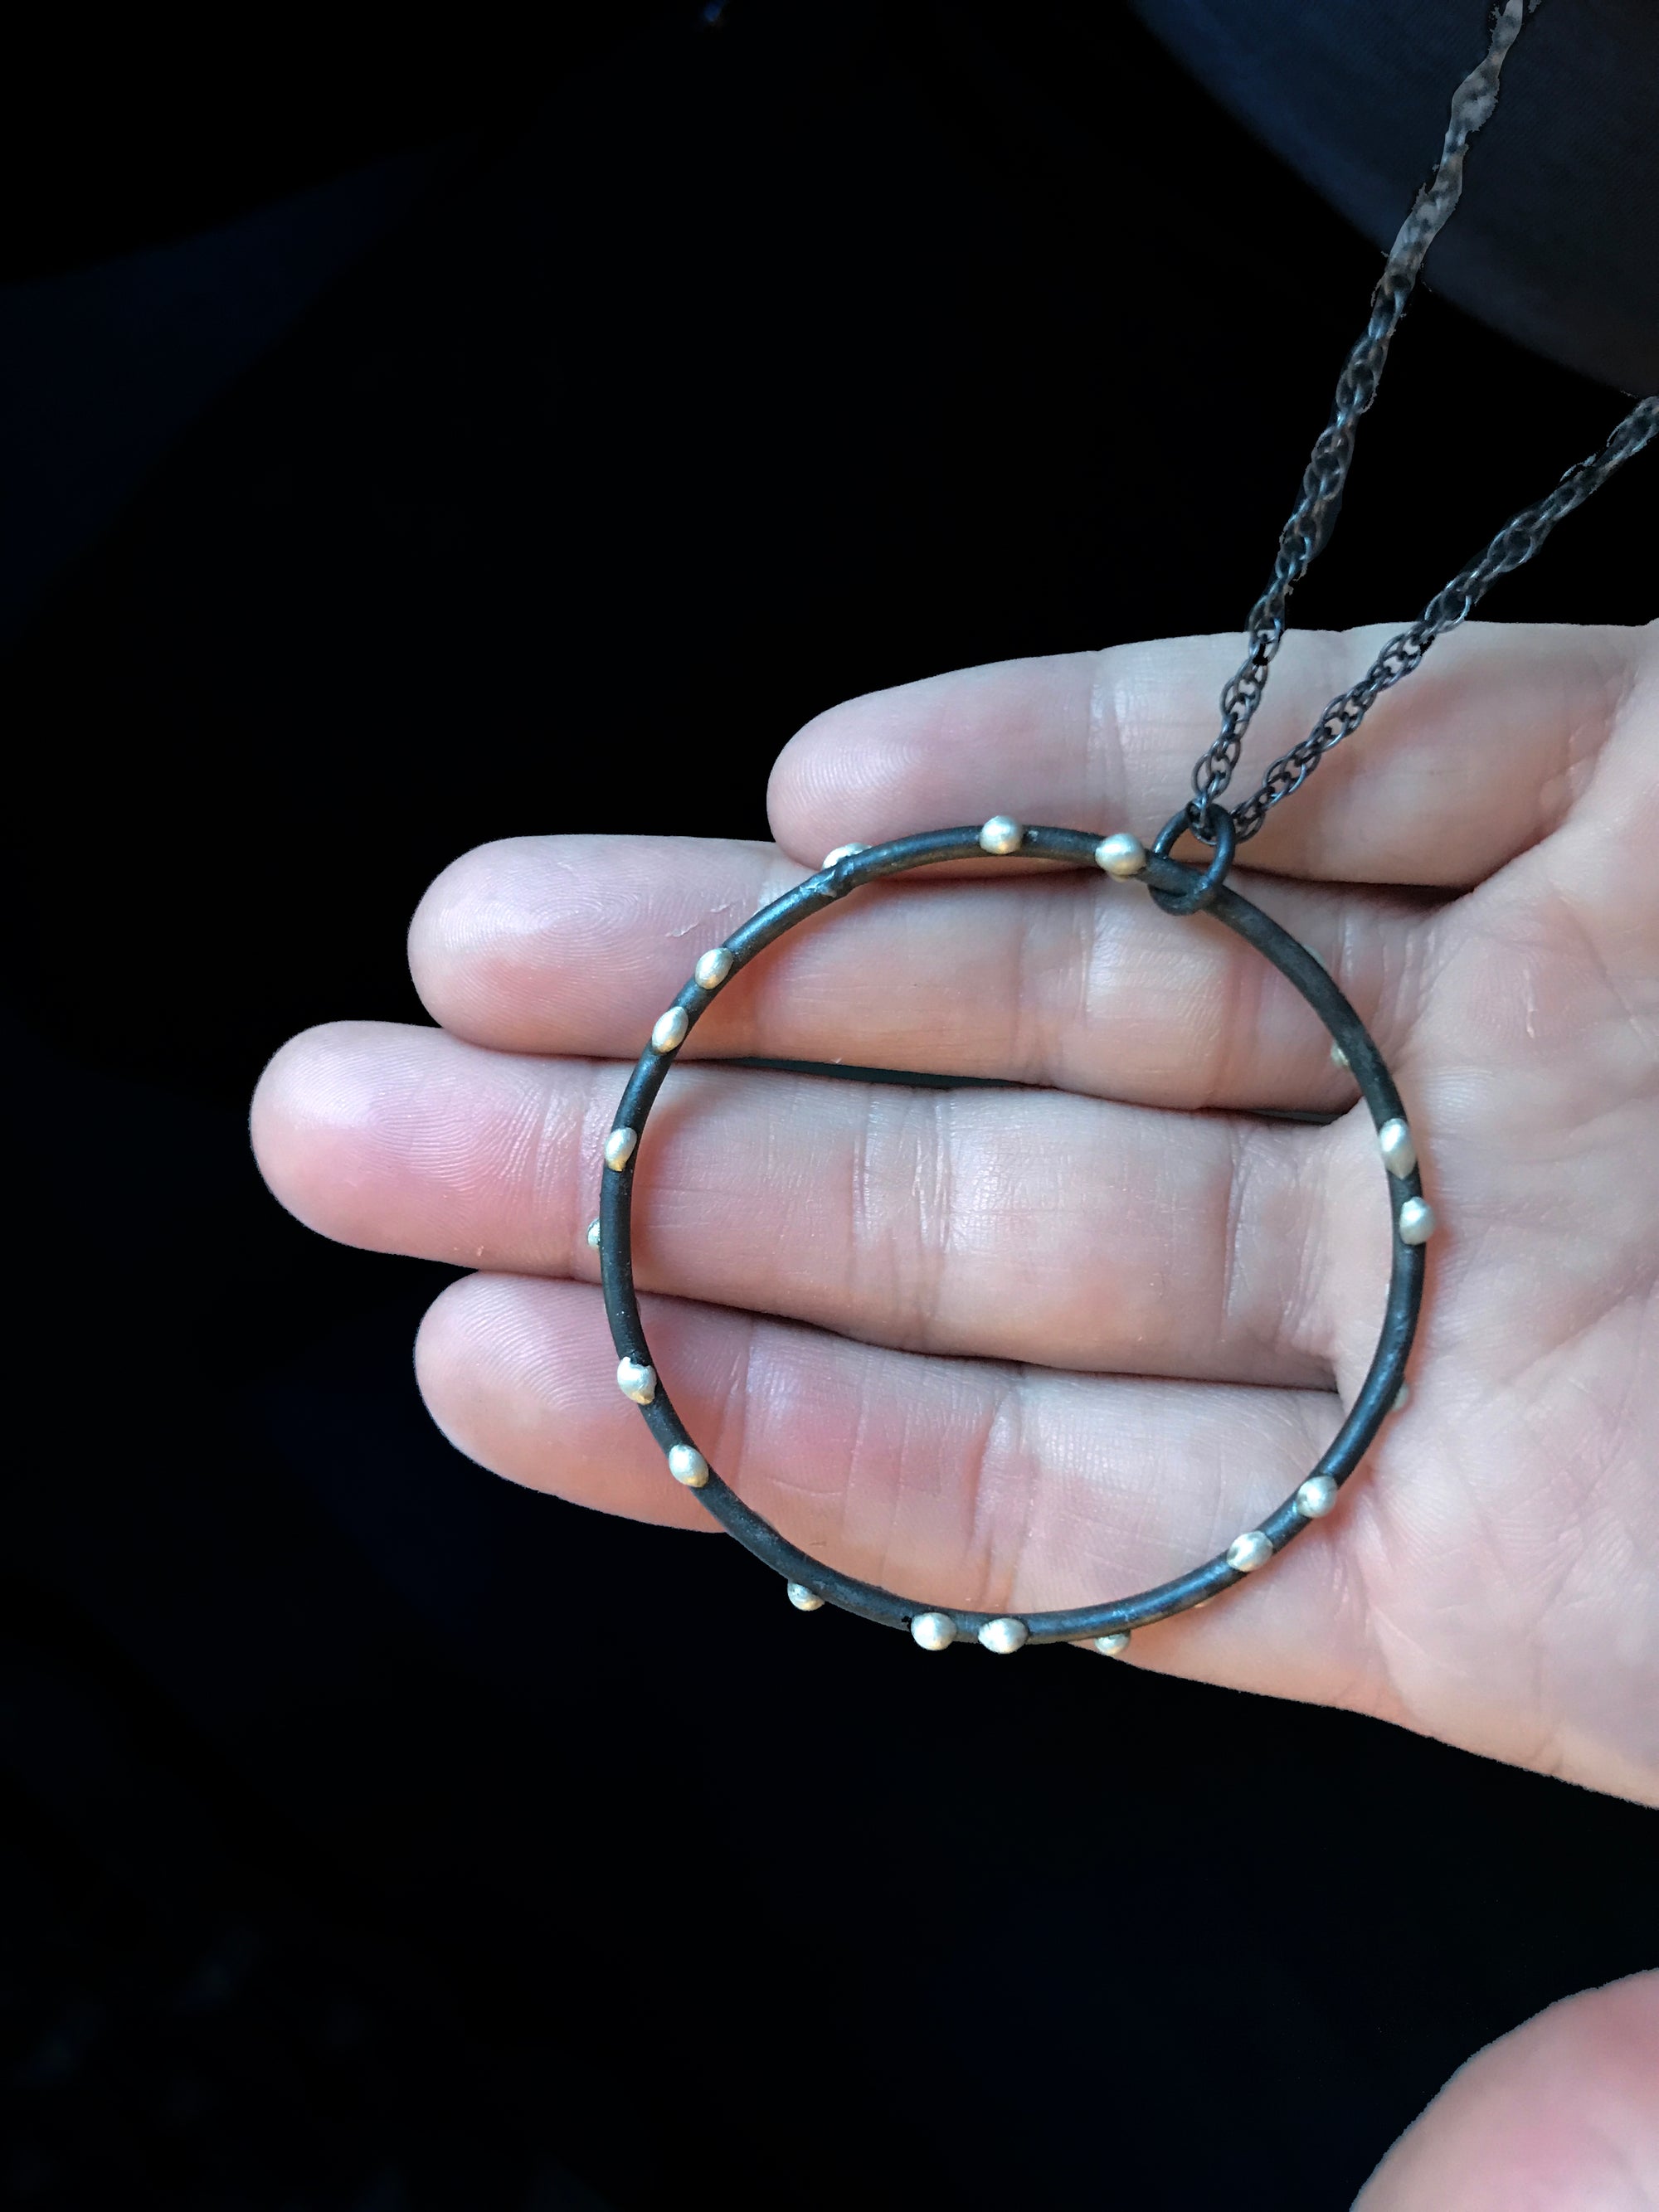 Extra Large Silver on Steel Circle Pendant on Long Chain - sample sale